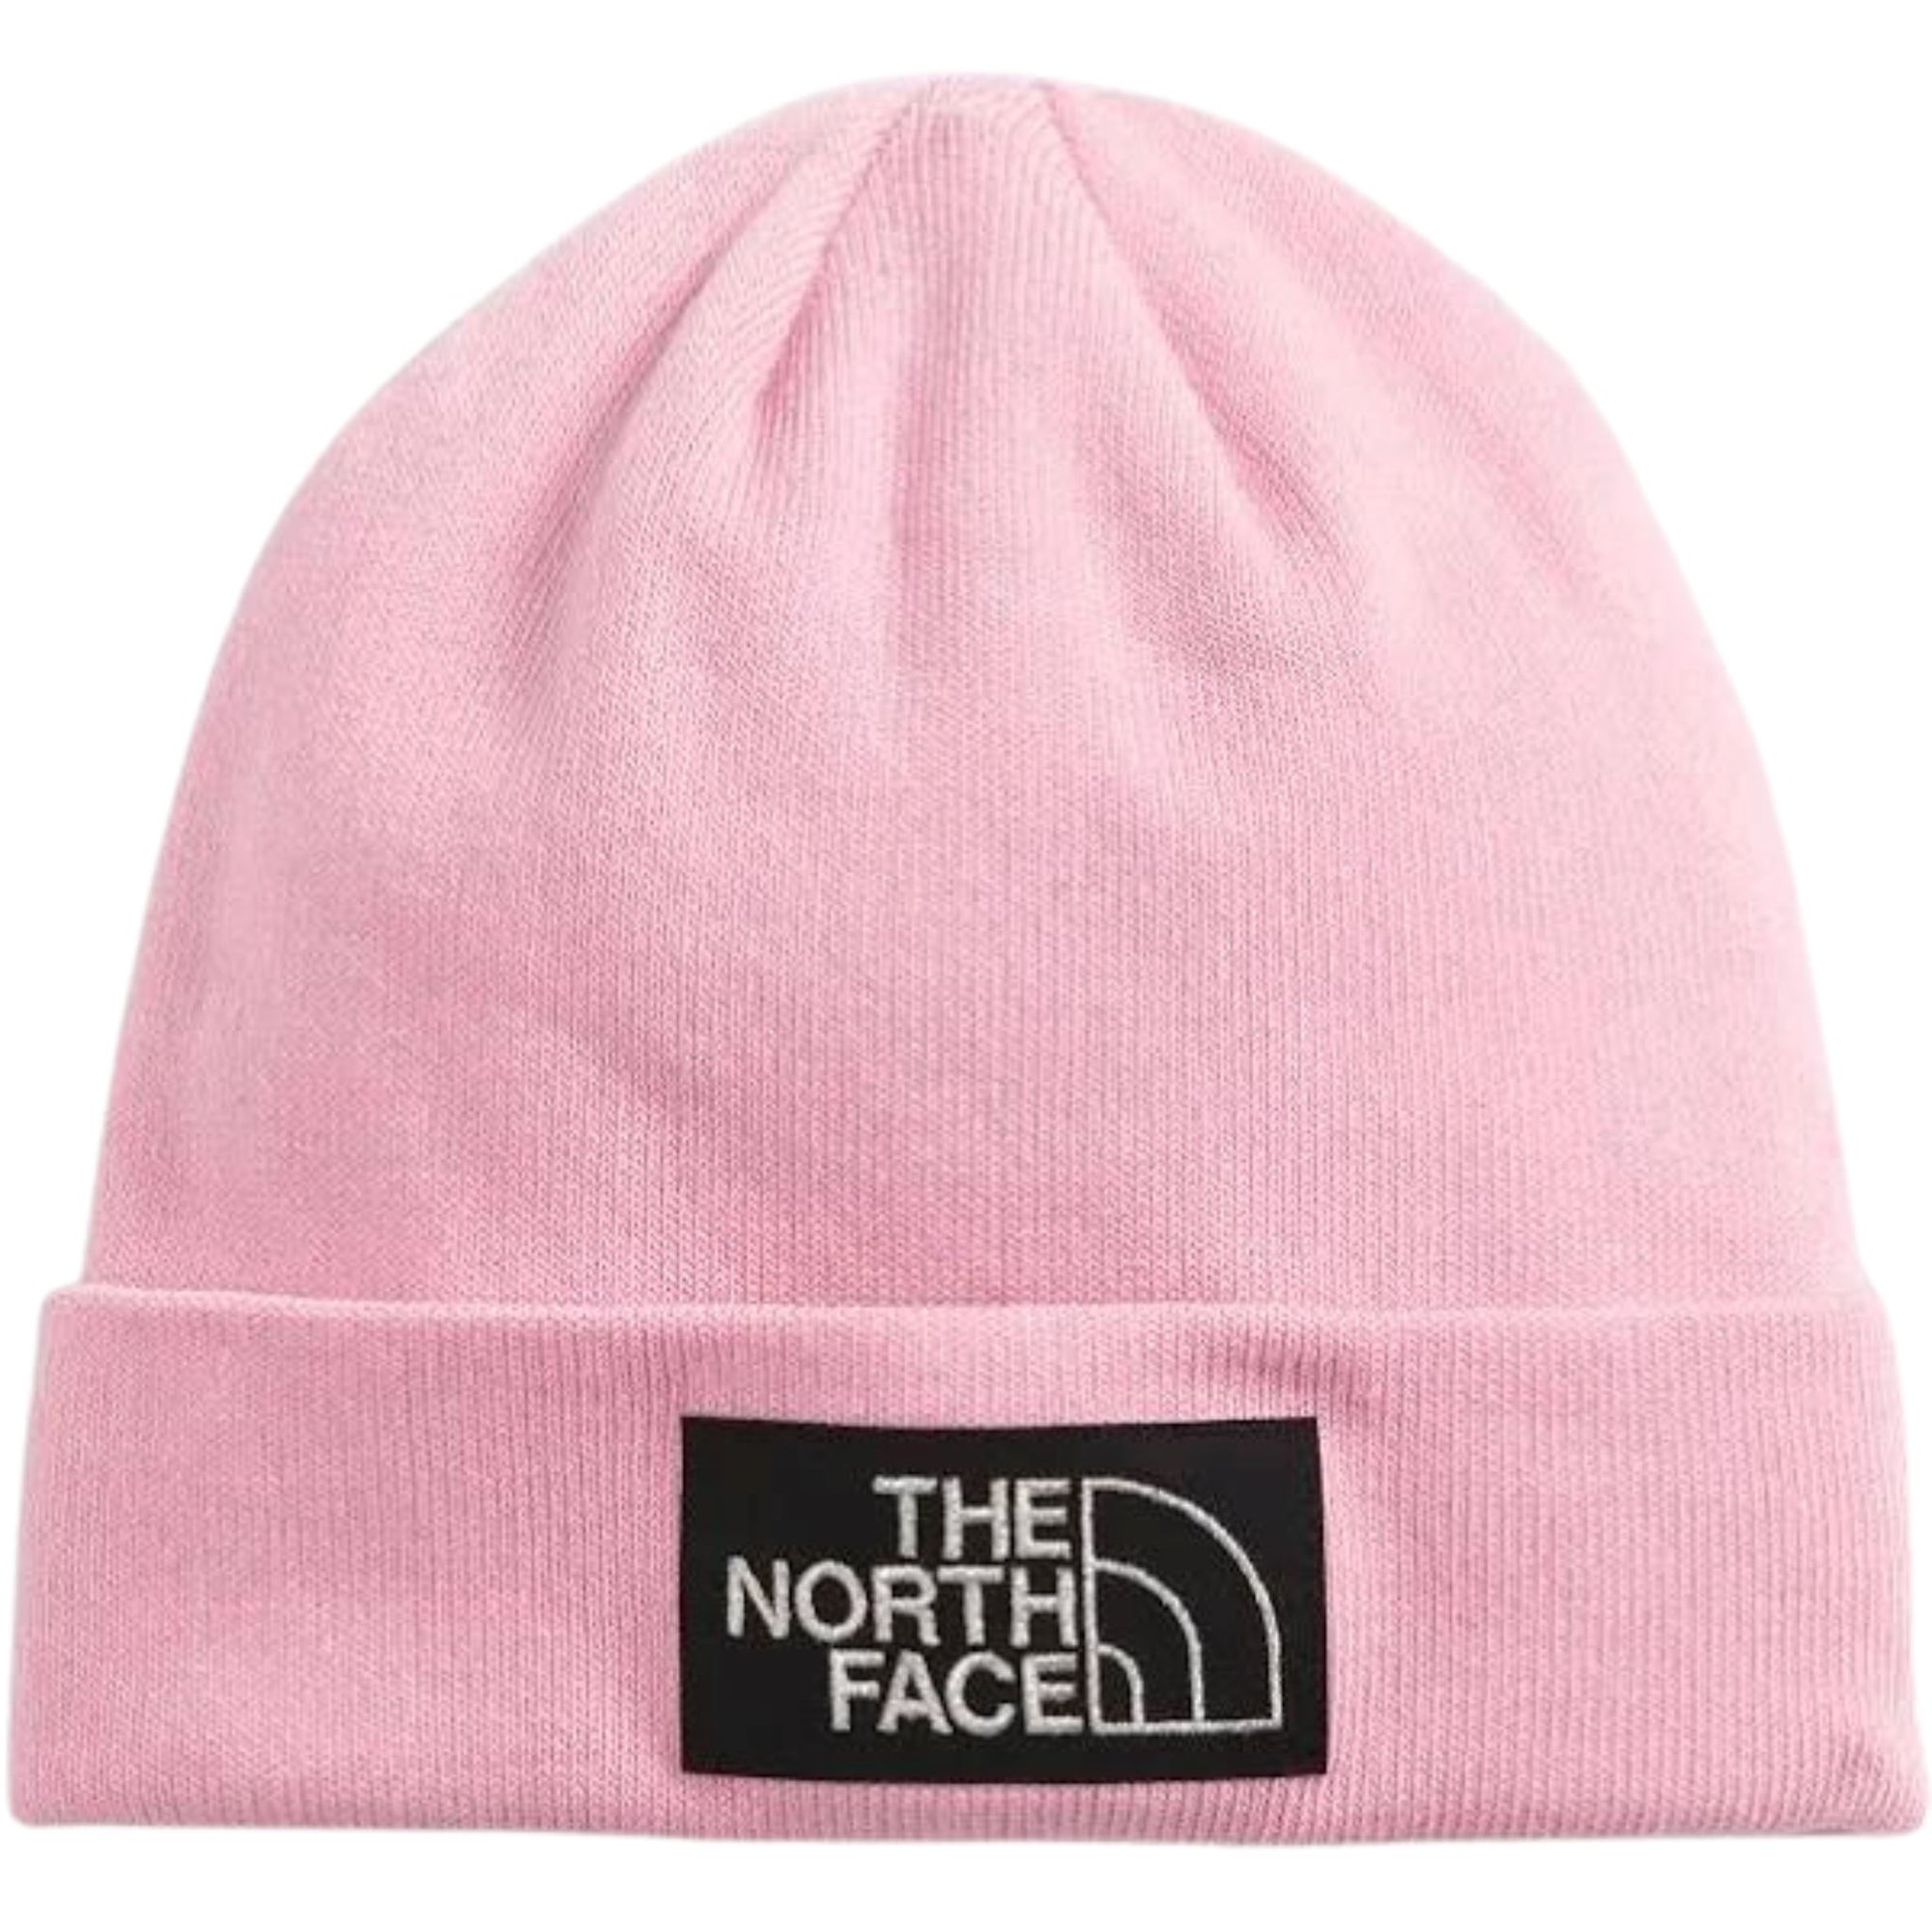 The North Face Dockworker Recycled Beanie - Cameo Pink Beanies The North Face 